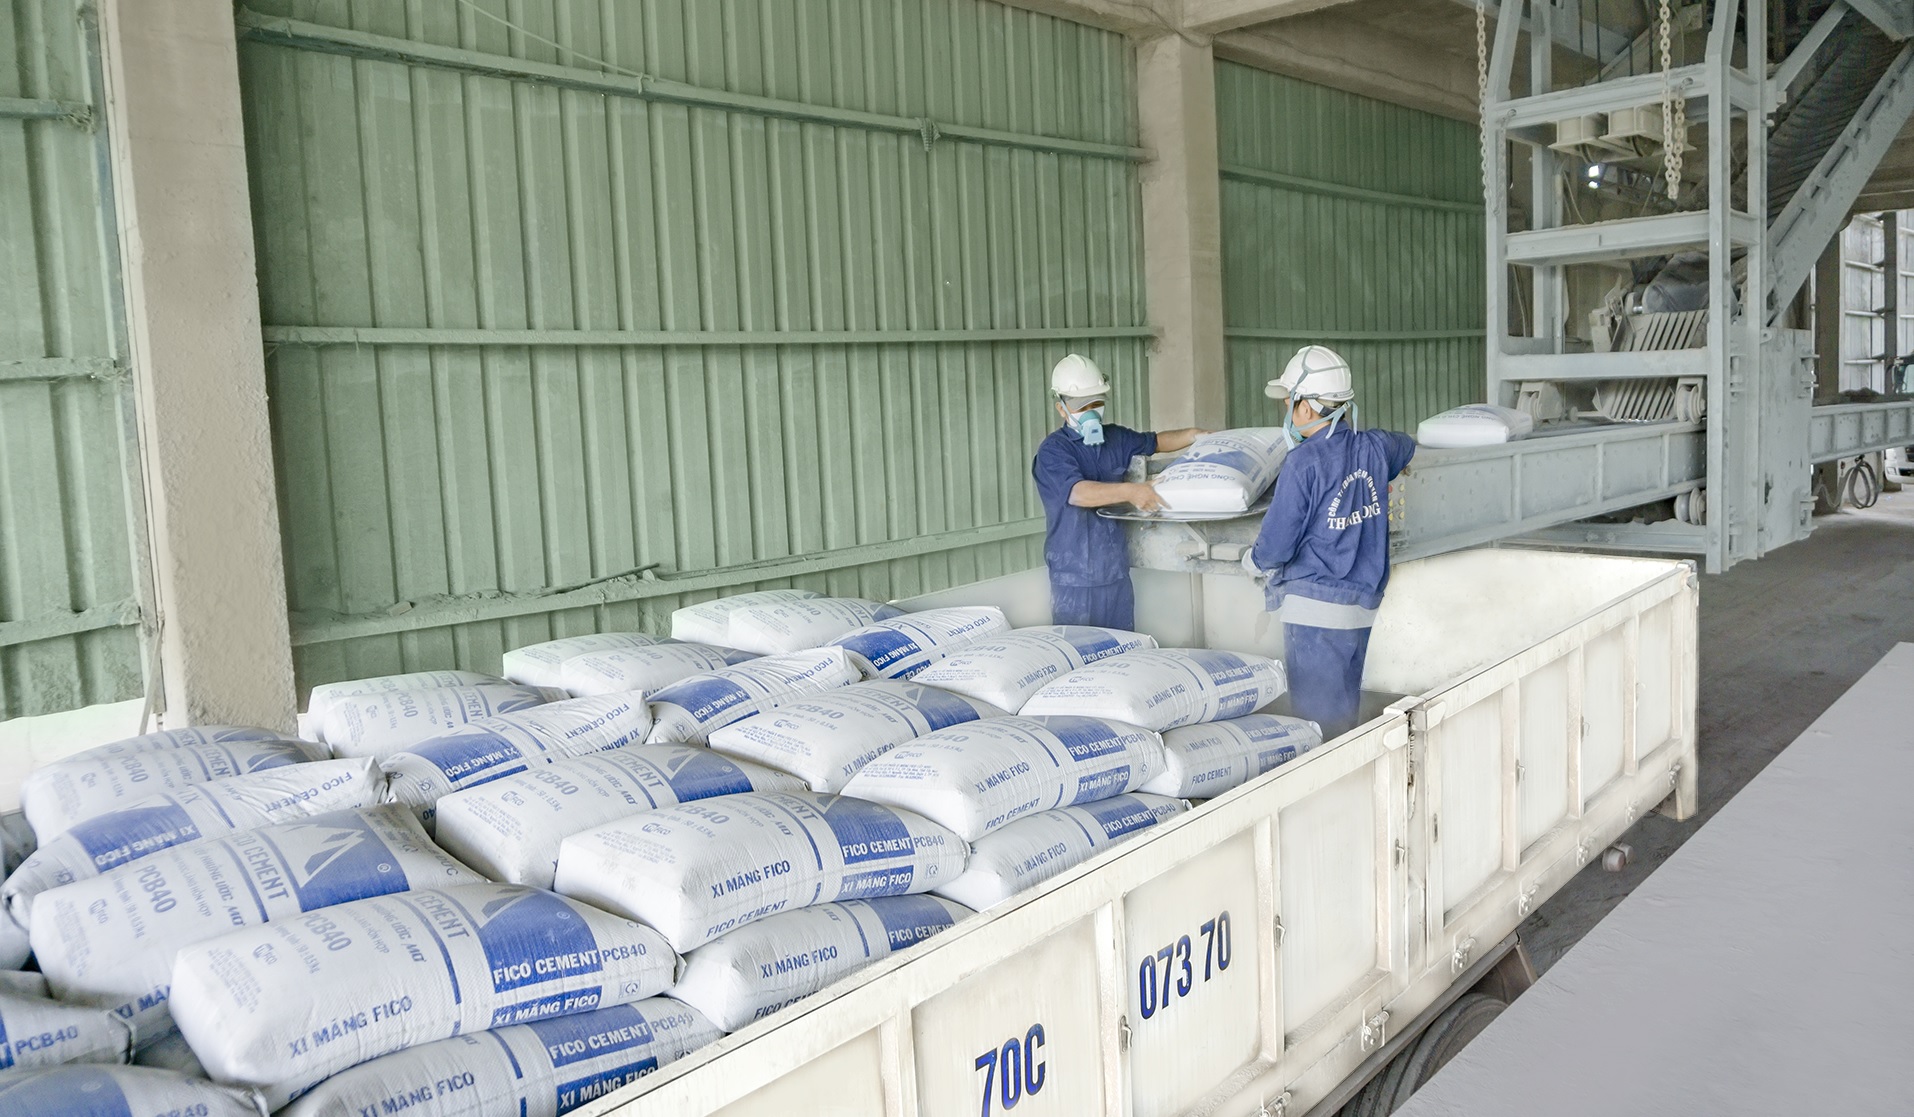 Producing and trading cement and post-cement products